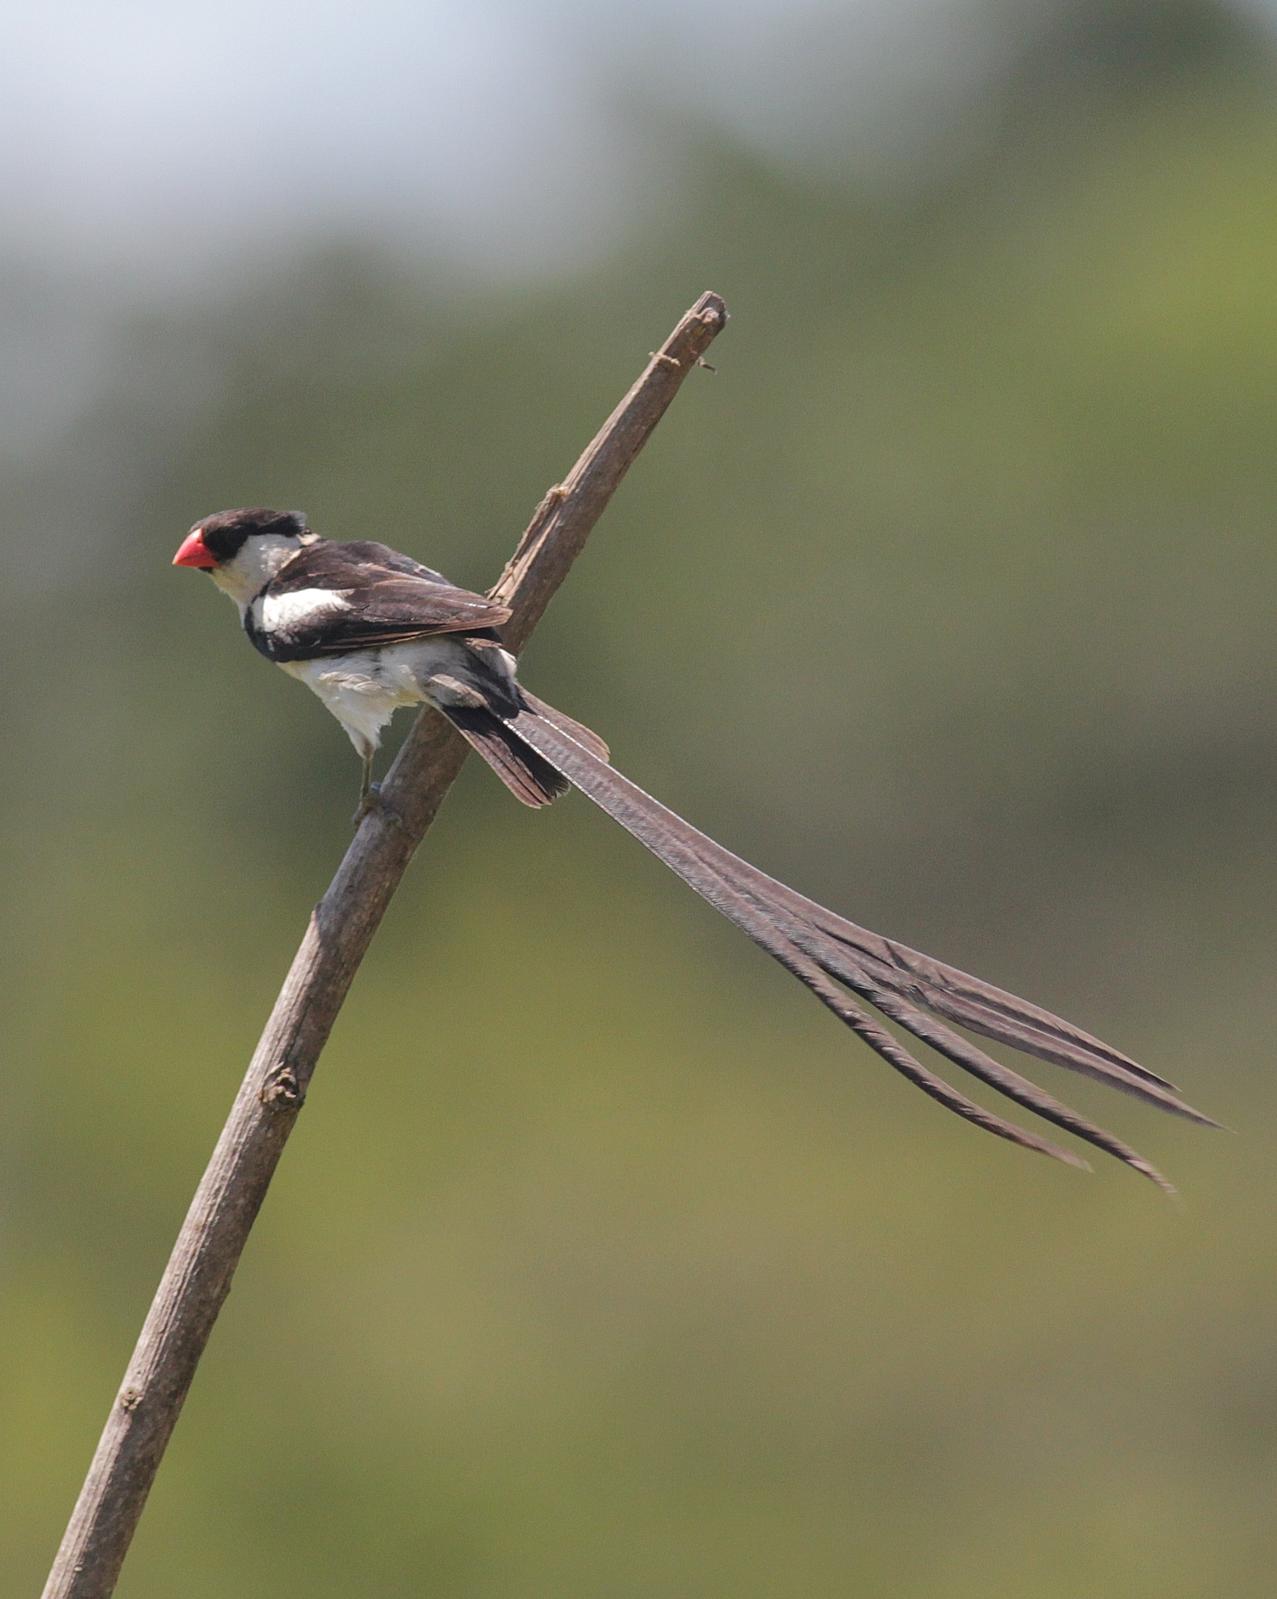 Pin-tailed Whydah Photo by Alex Lamoreaux